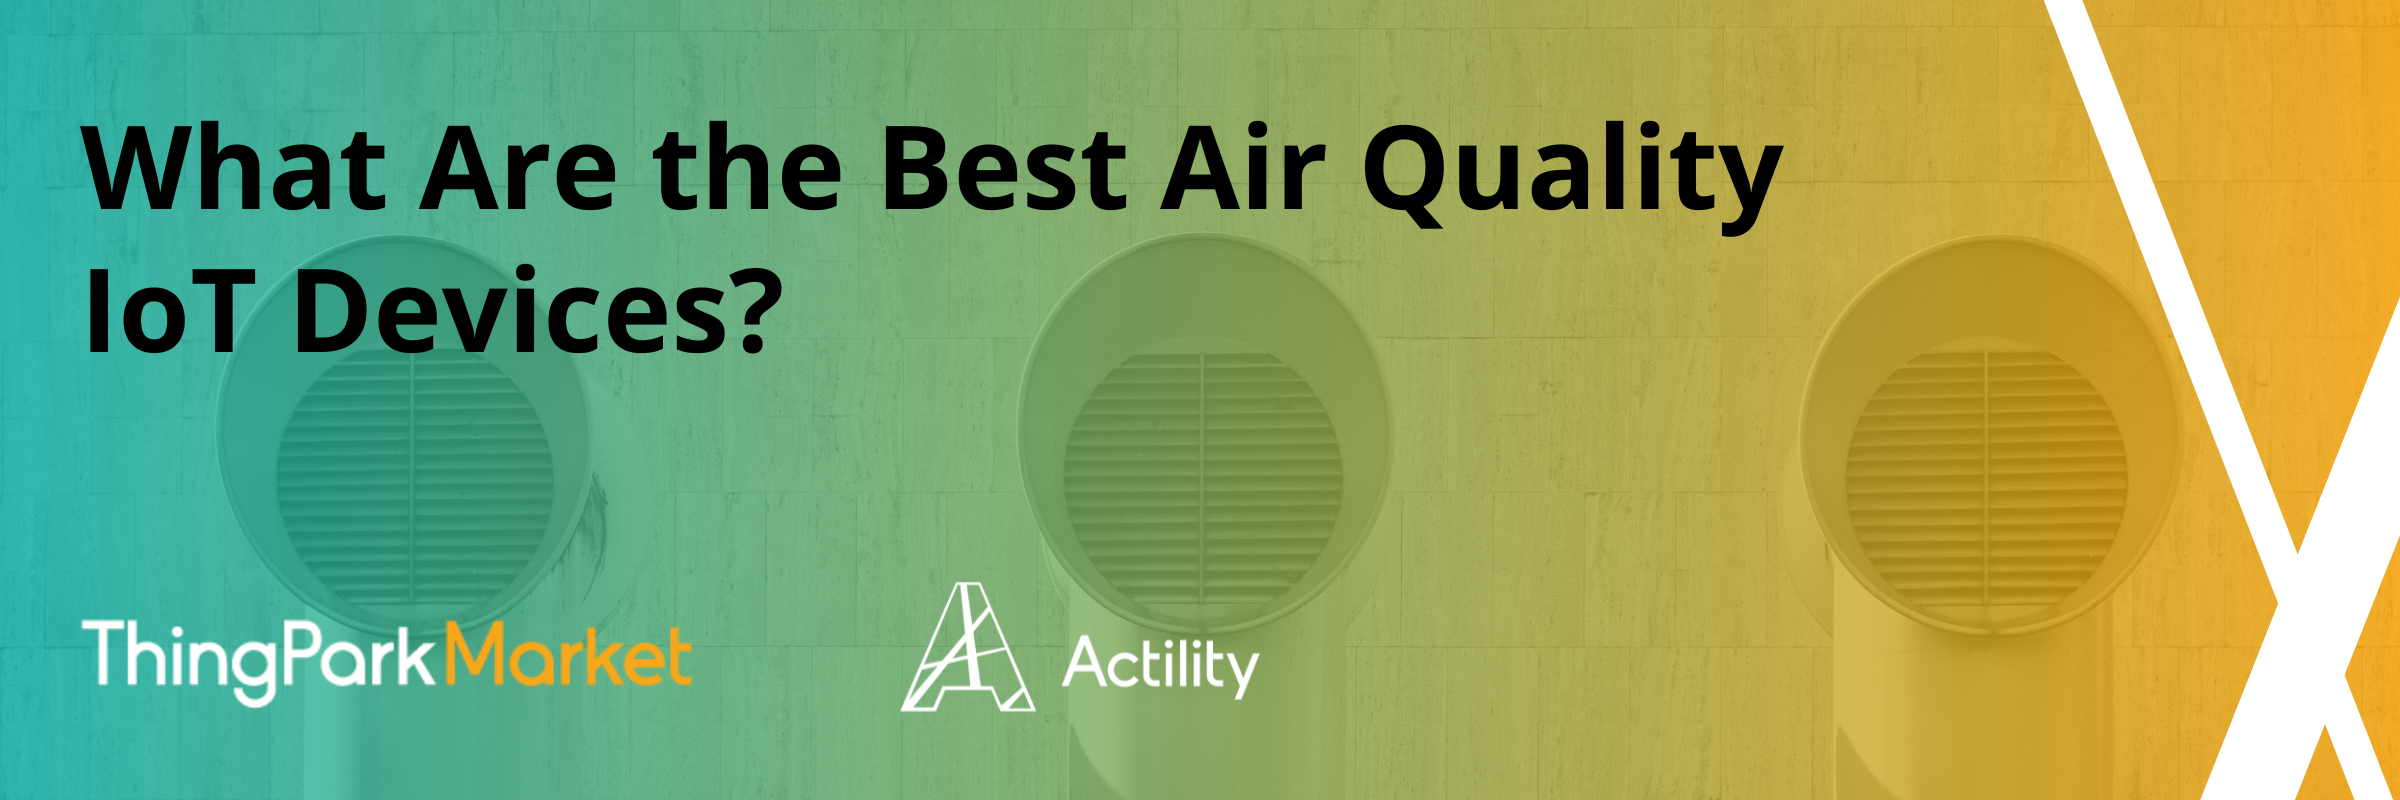 What Are the Best Air Quality IoT Devices?